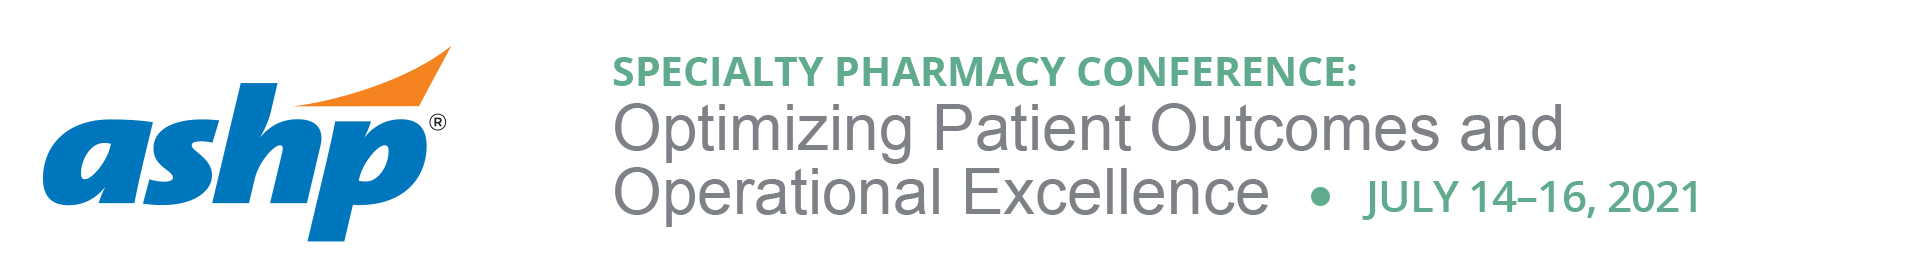 ASHP's Specialty Pharmacy Conference: Optimizing Patient Outcomes and Operational Excellence Event Banner